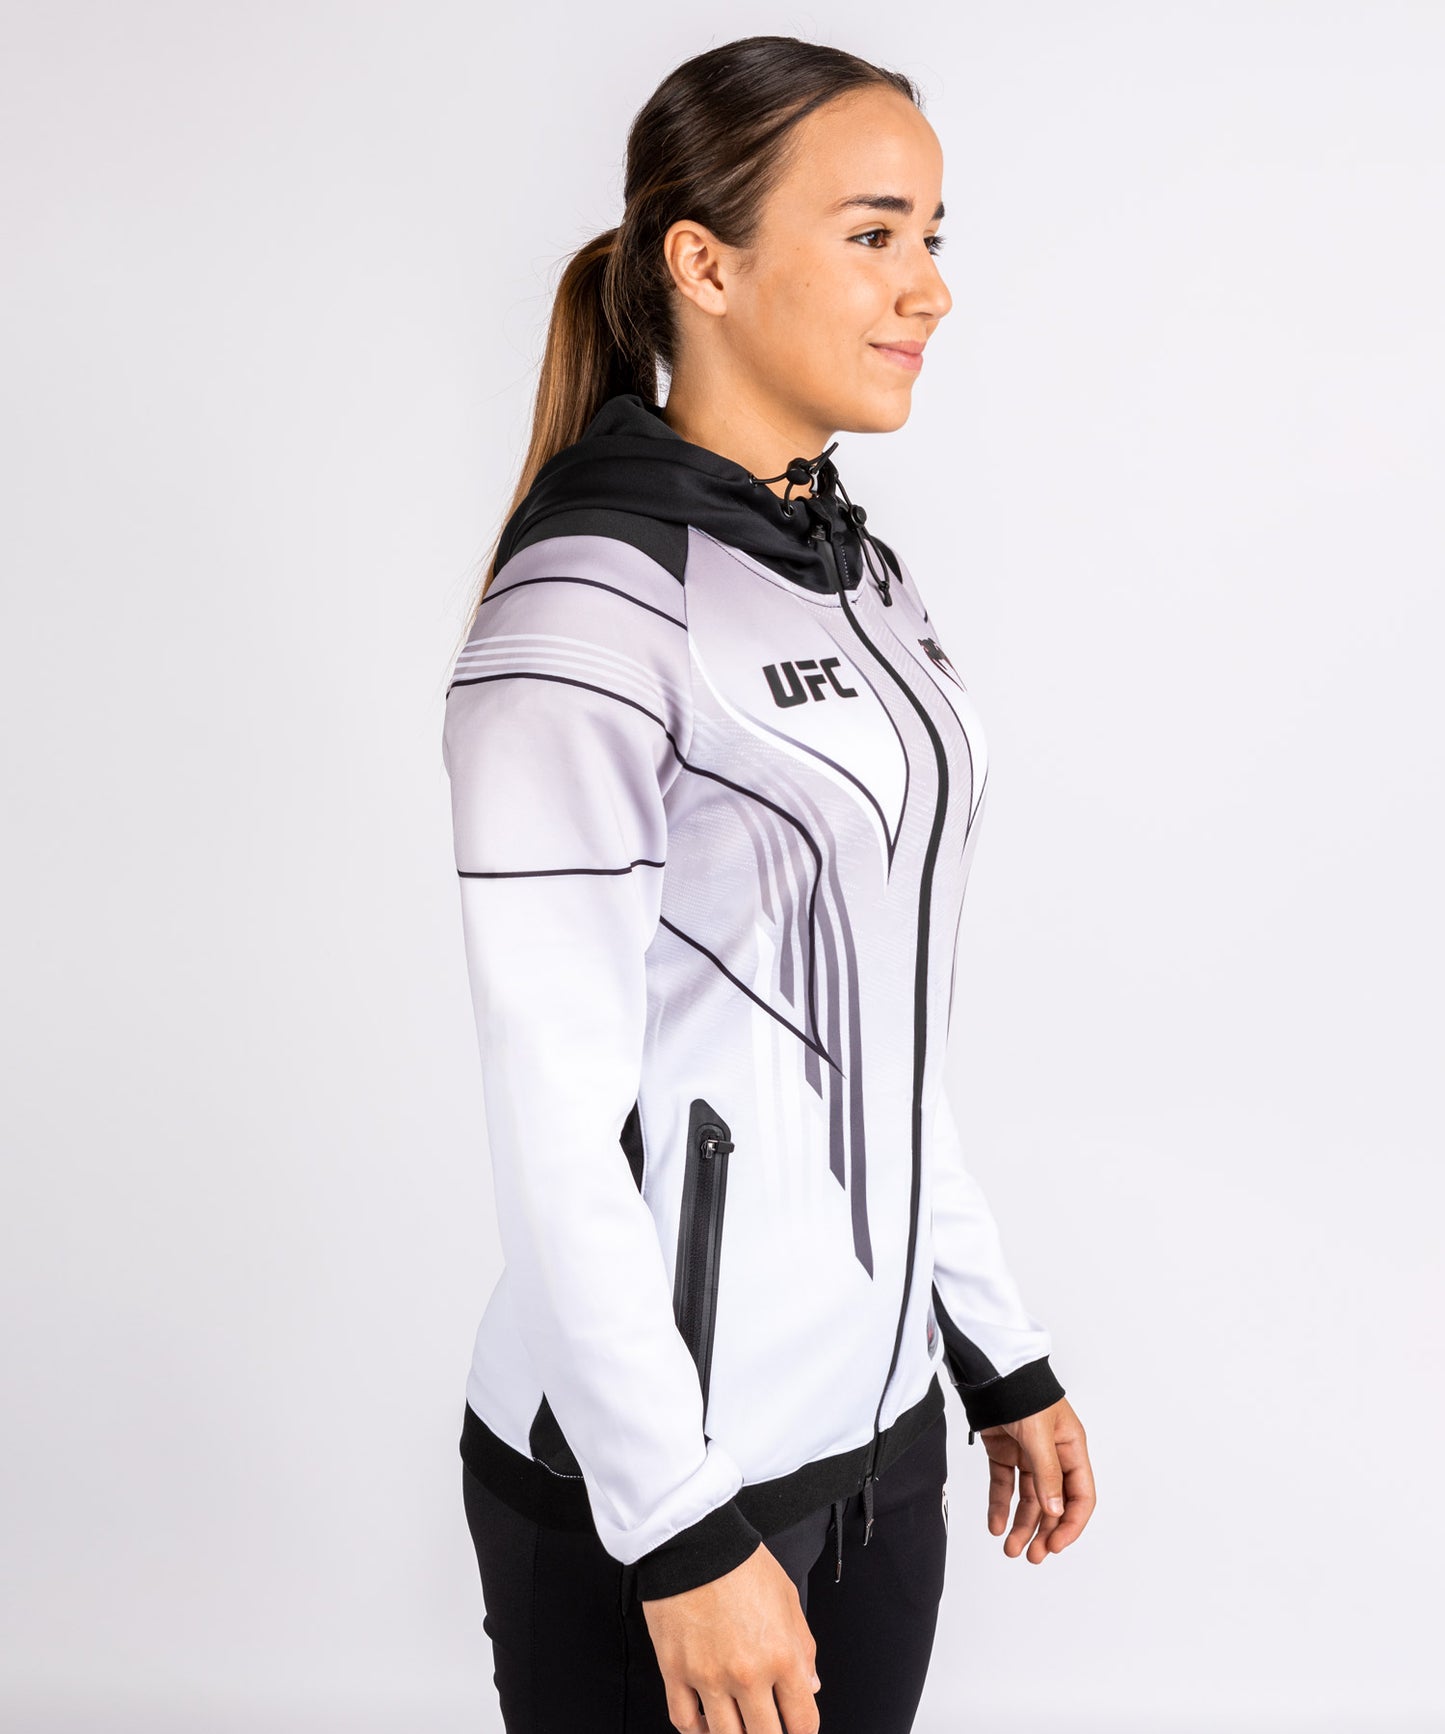 UFC Venum Personalized Authentic Fight Night 2.0 Women's Walkout Hoodie - White